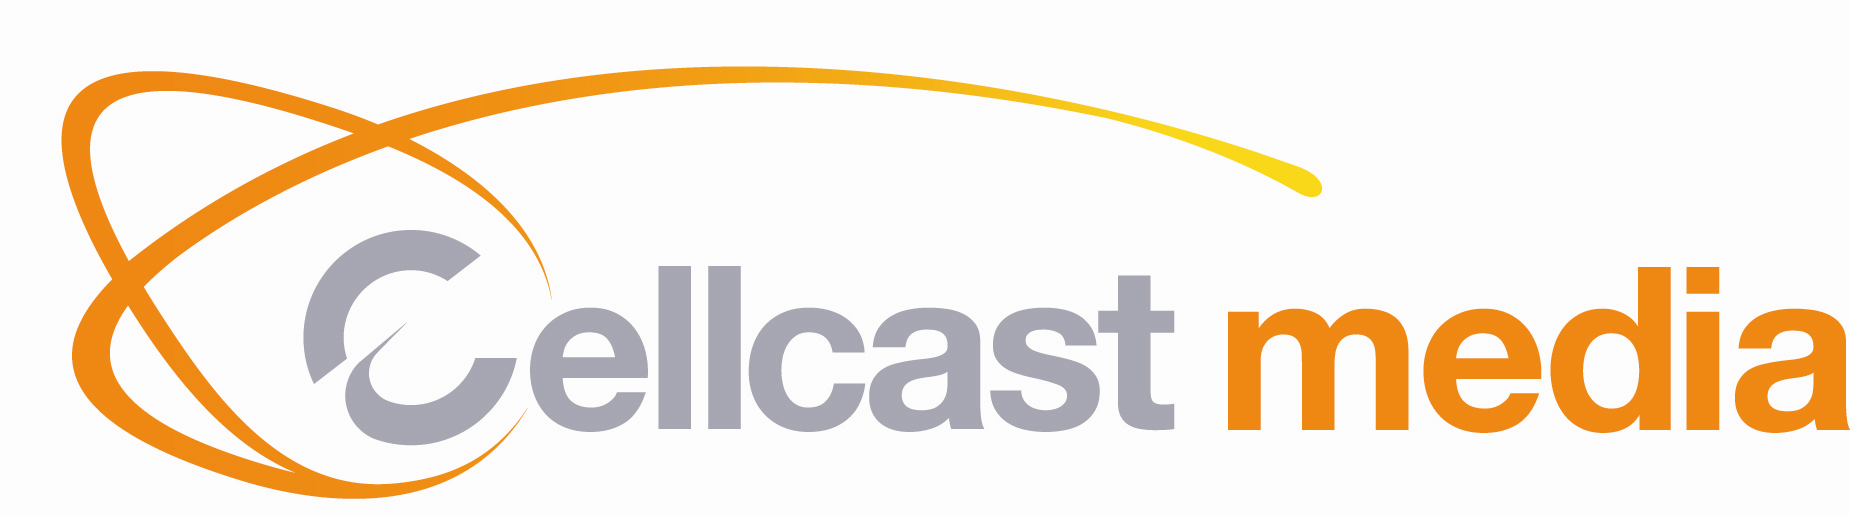 LOGO_CELLCAST.PNG